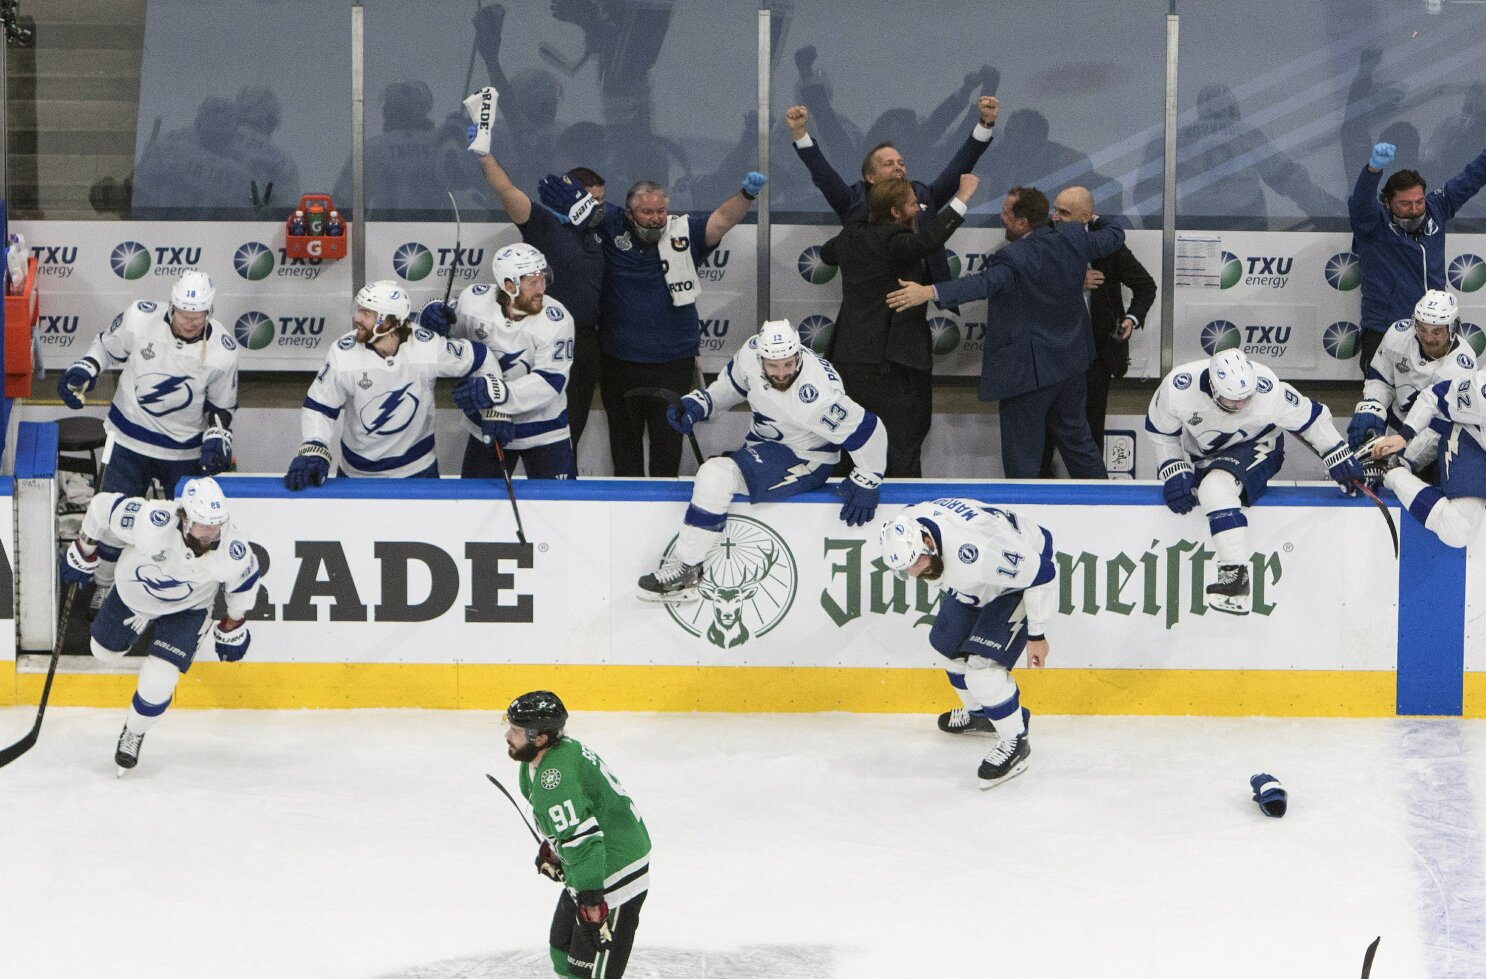 Tampa Bay Lightning defeat Dallas Stars in Game 6 to win Stanley